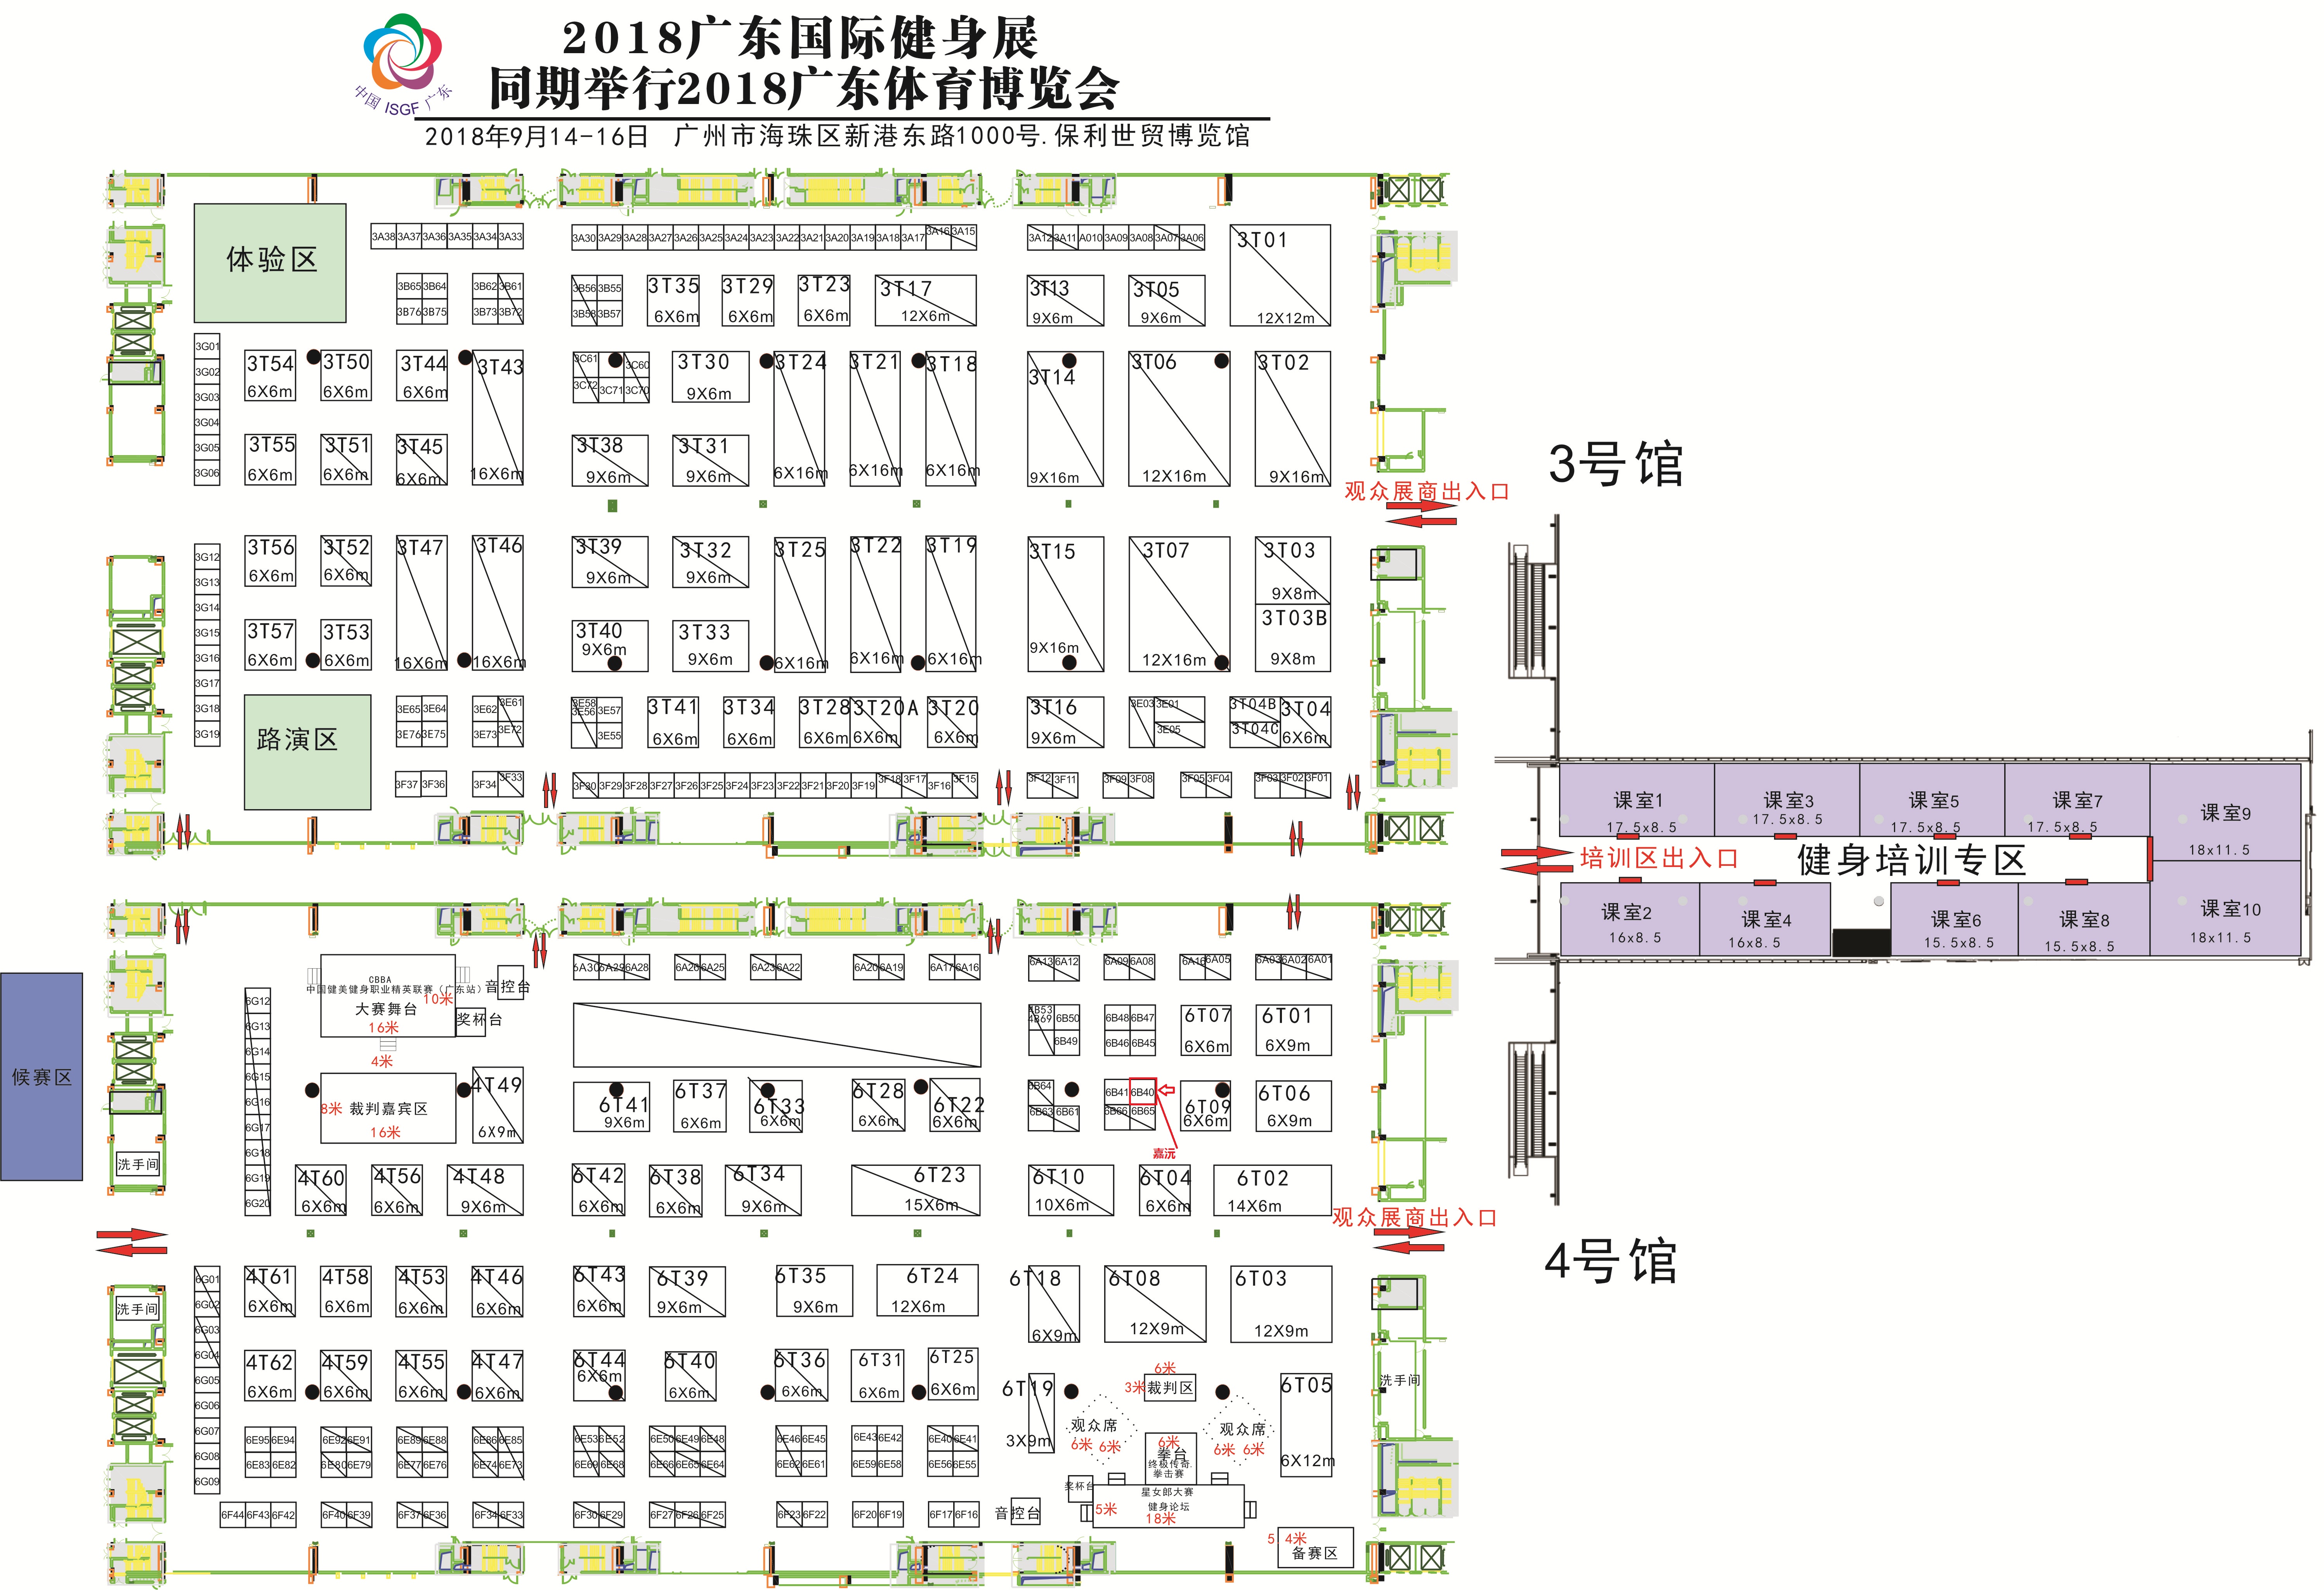 2018 Guangdong Sport Show【Booth map】